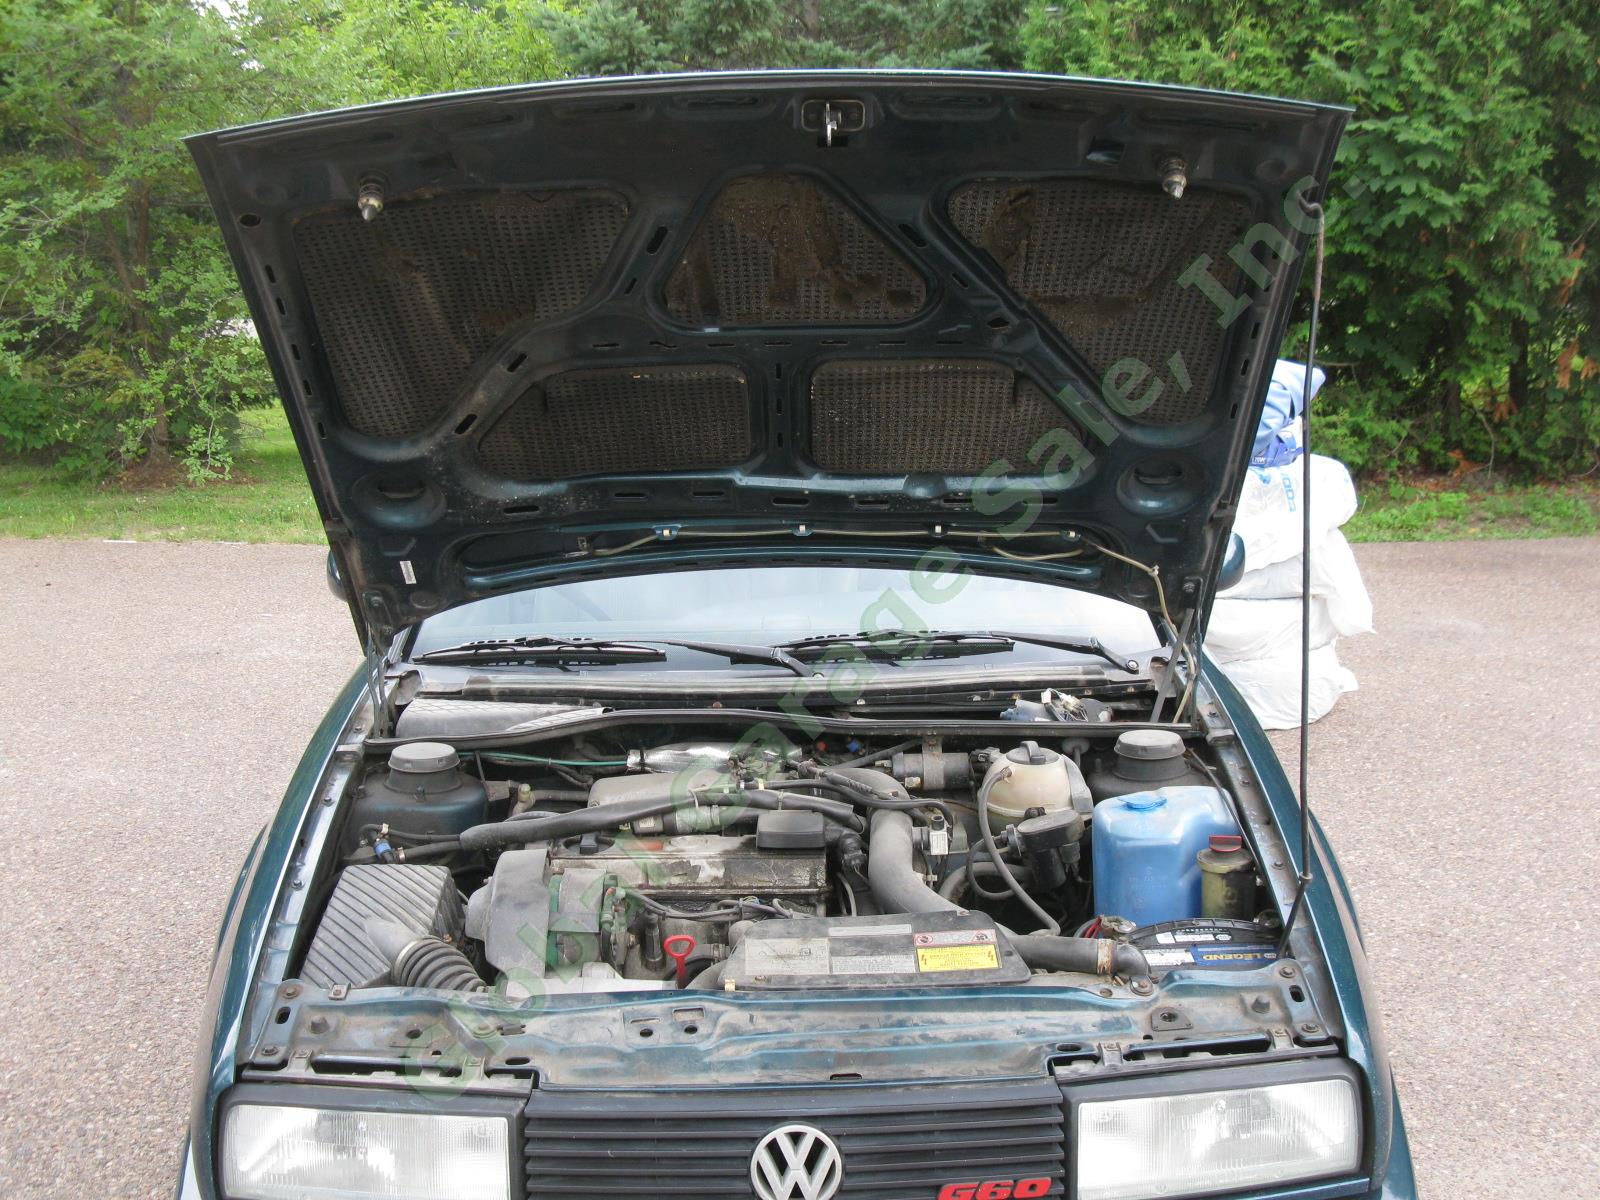 1992 VW Volkswagen Corrado G60 Supercharged 158hp 1.8L 5-Spd One Owner LOW PRICE 33